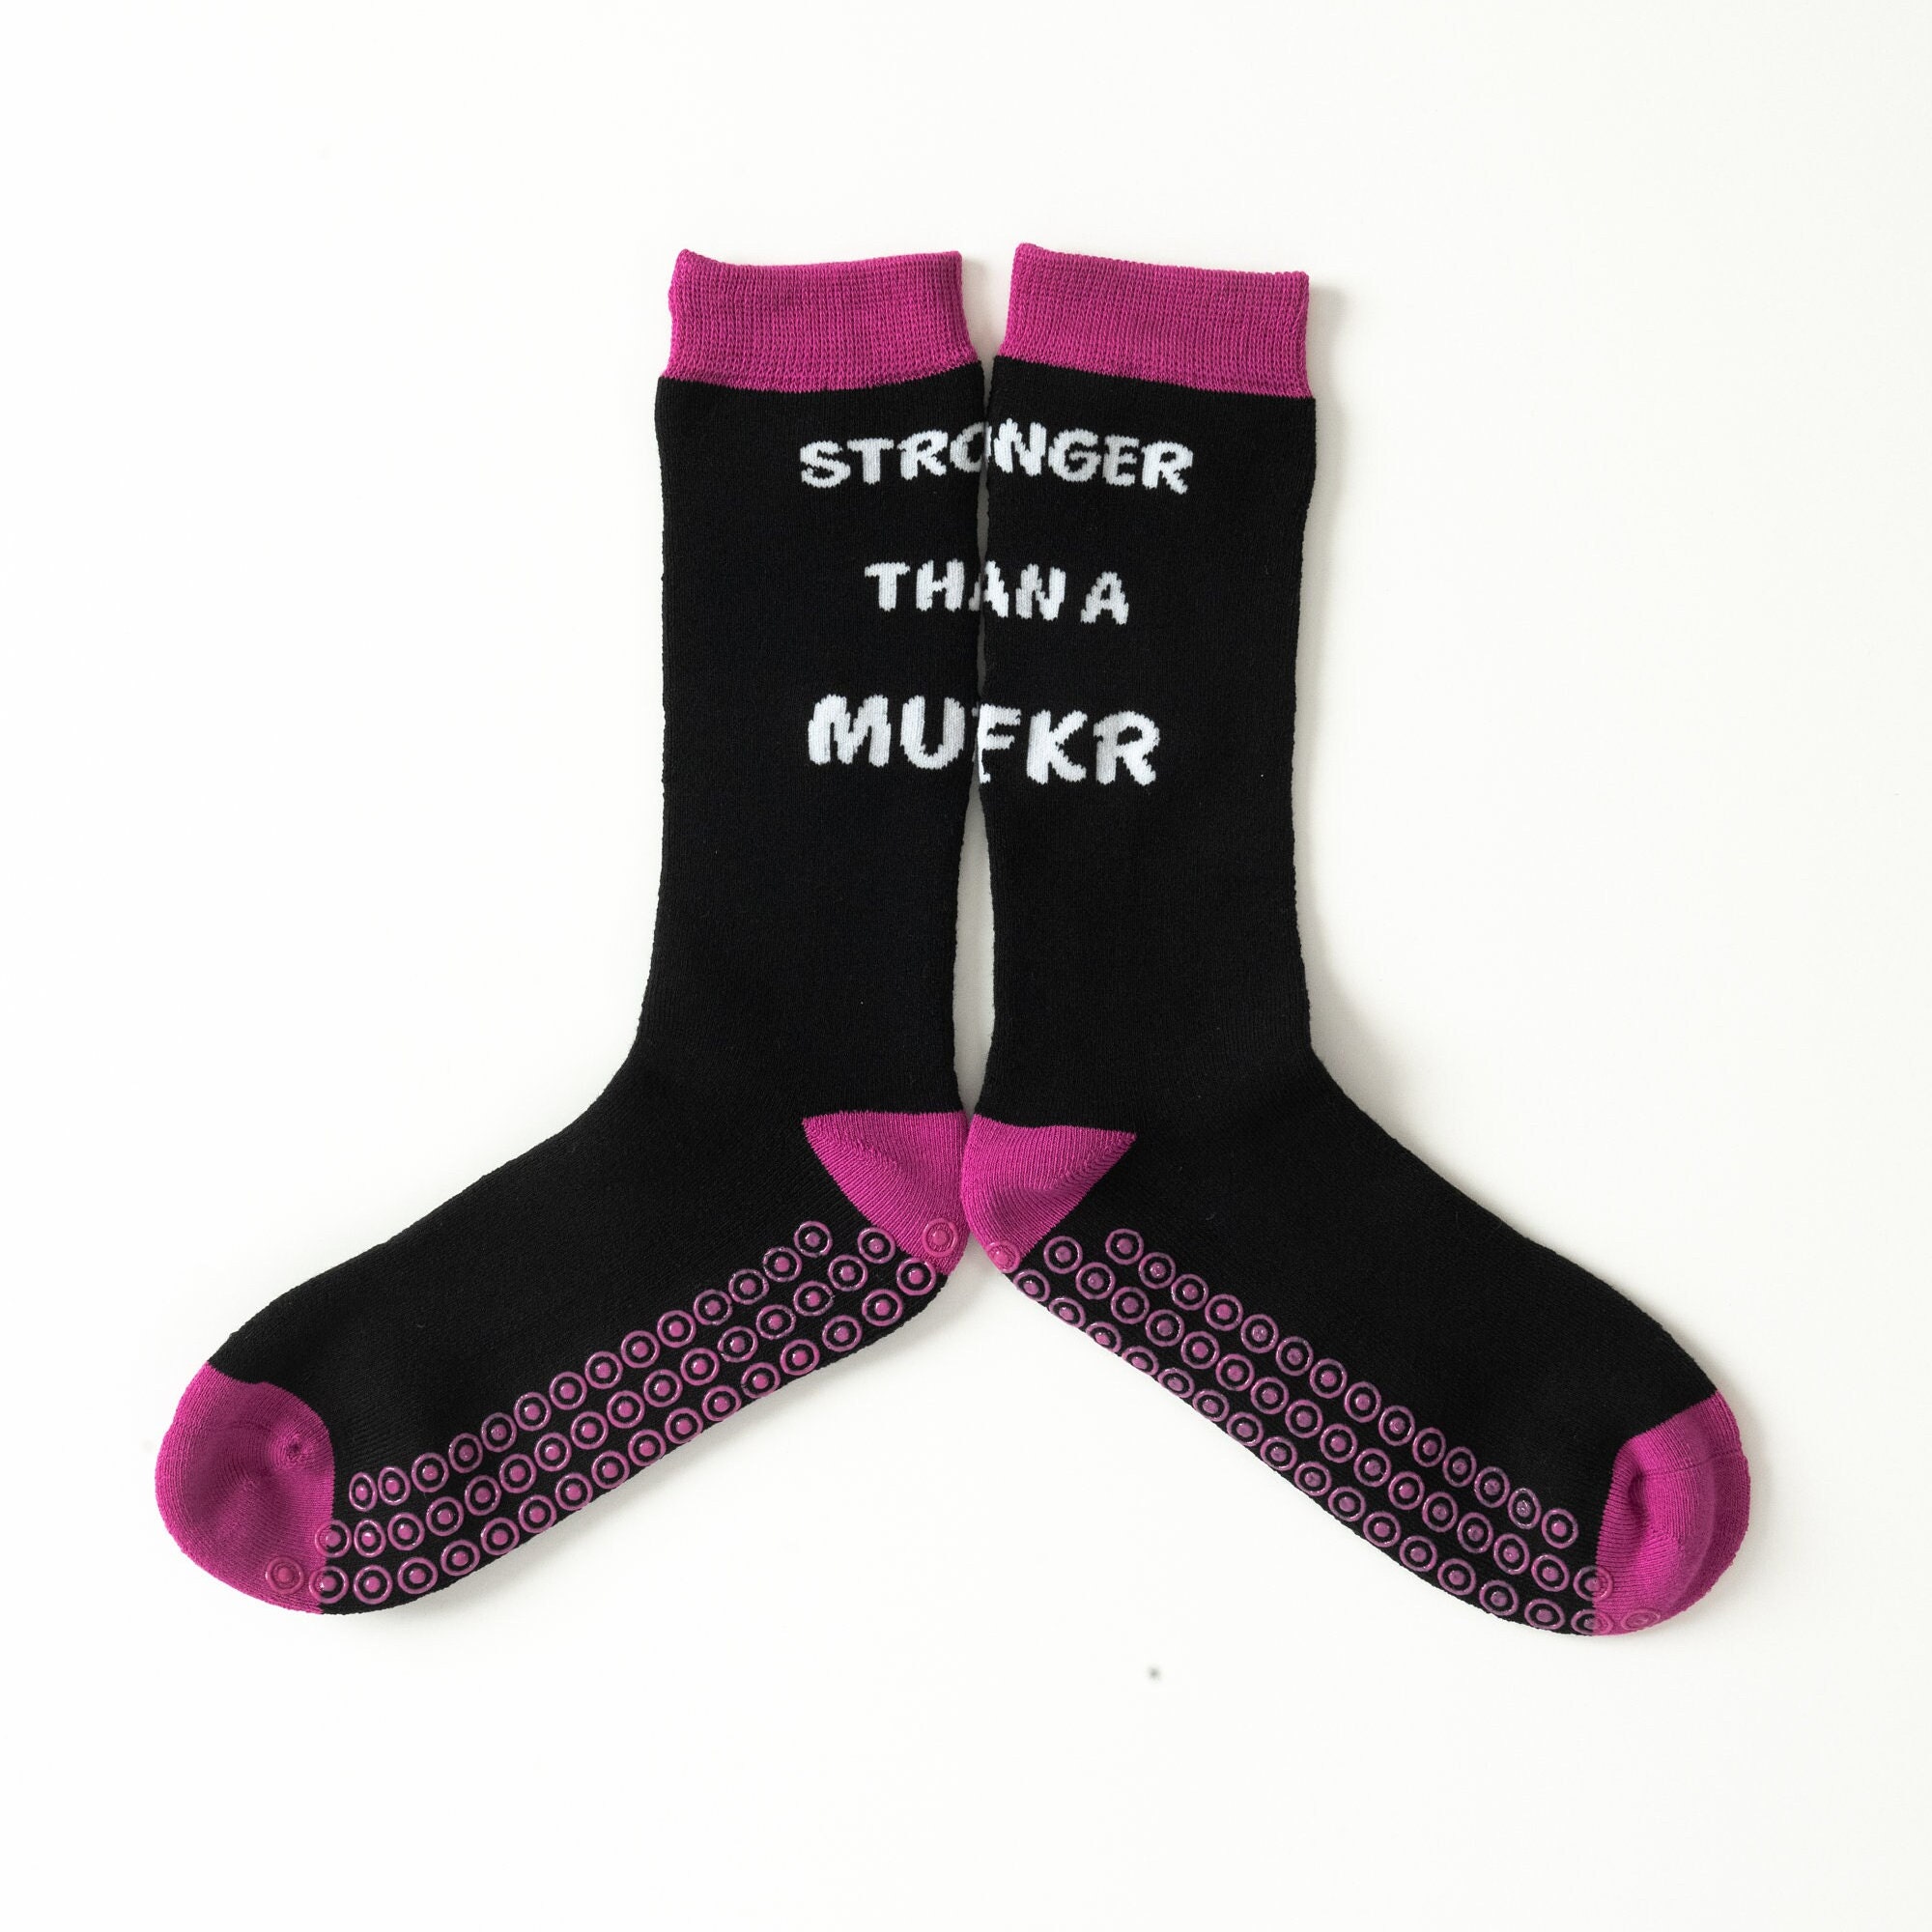  Cancer Socks, Cancer Patients Must Have, Comfort Items For  Chemo Patients, Chemotherapy Must Haves For Women, Breast Cancer Gift, If  You Can Read This I'm Kicking Cancer Socks. : Clothing, Shoes